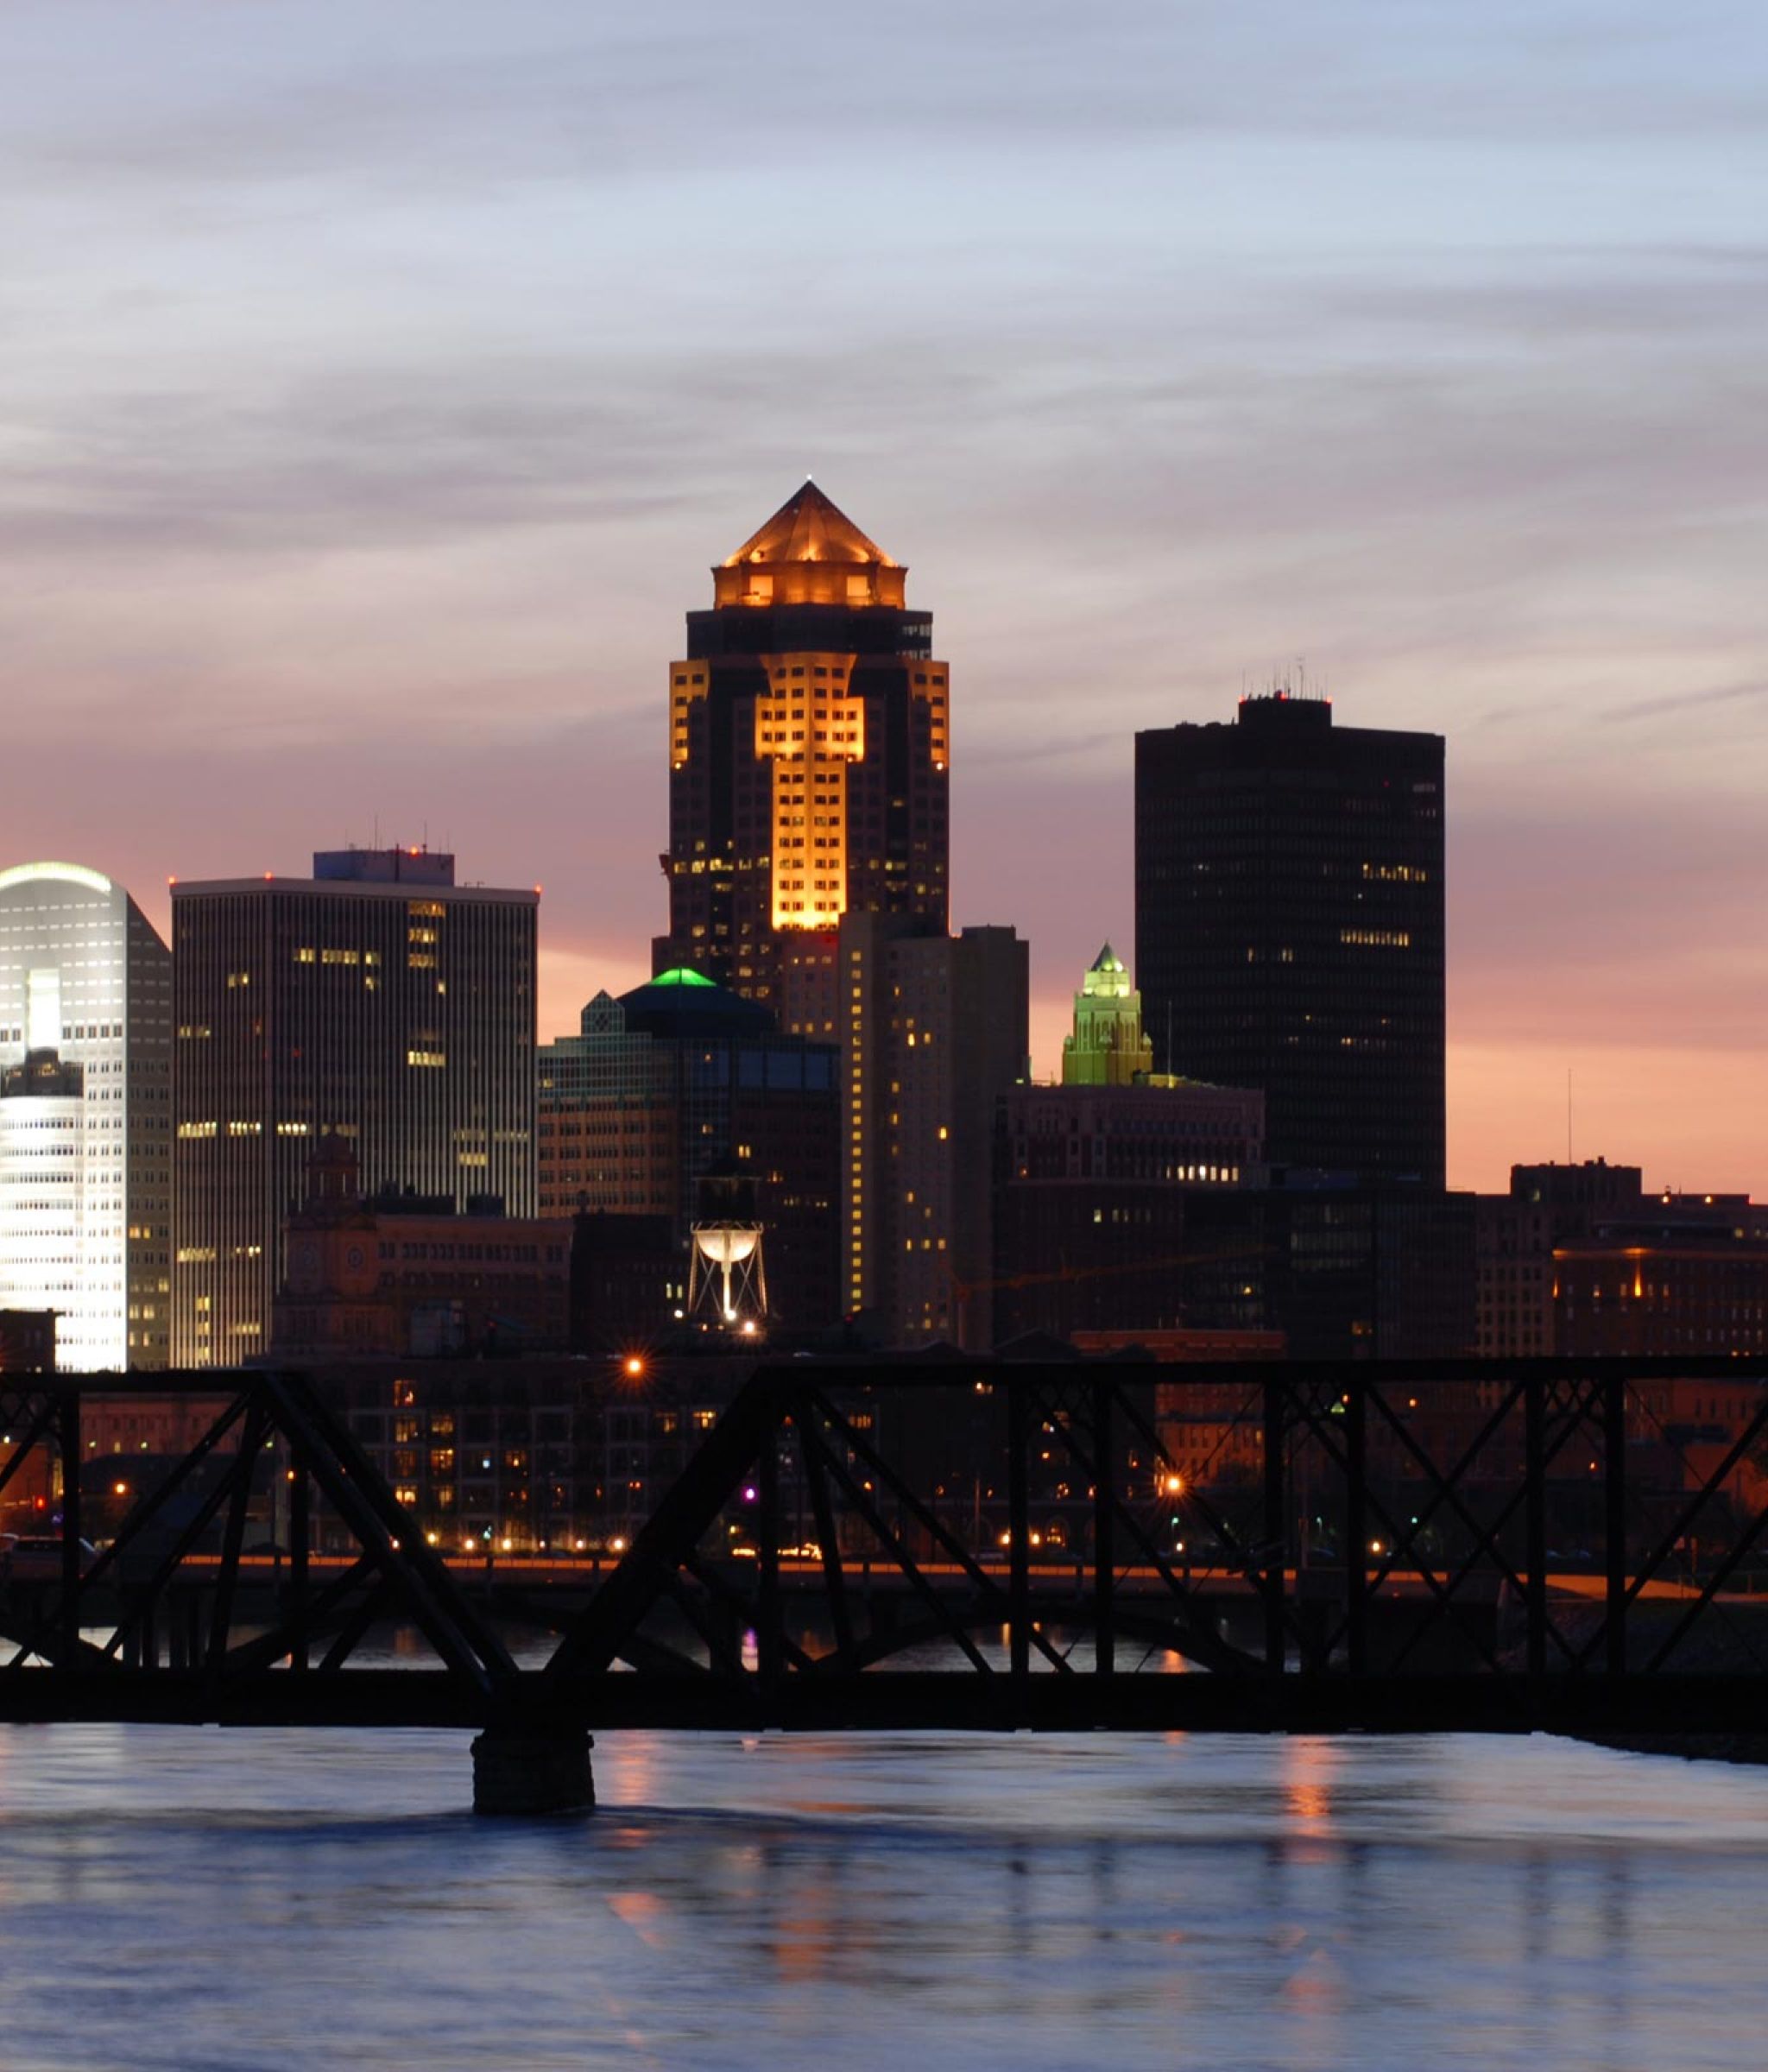 Des Moines Iowa skyline at evening overlooking the water and tall buildings